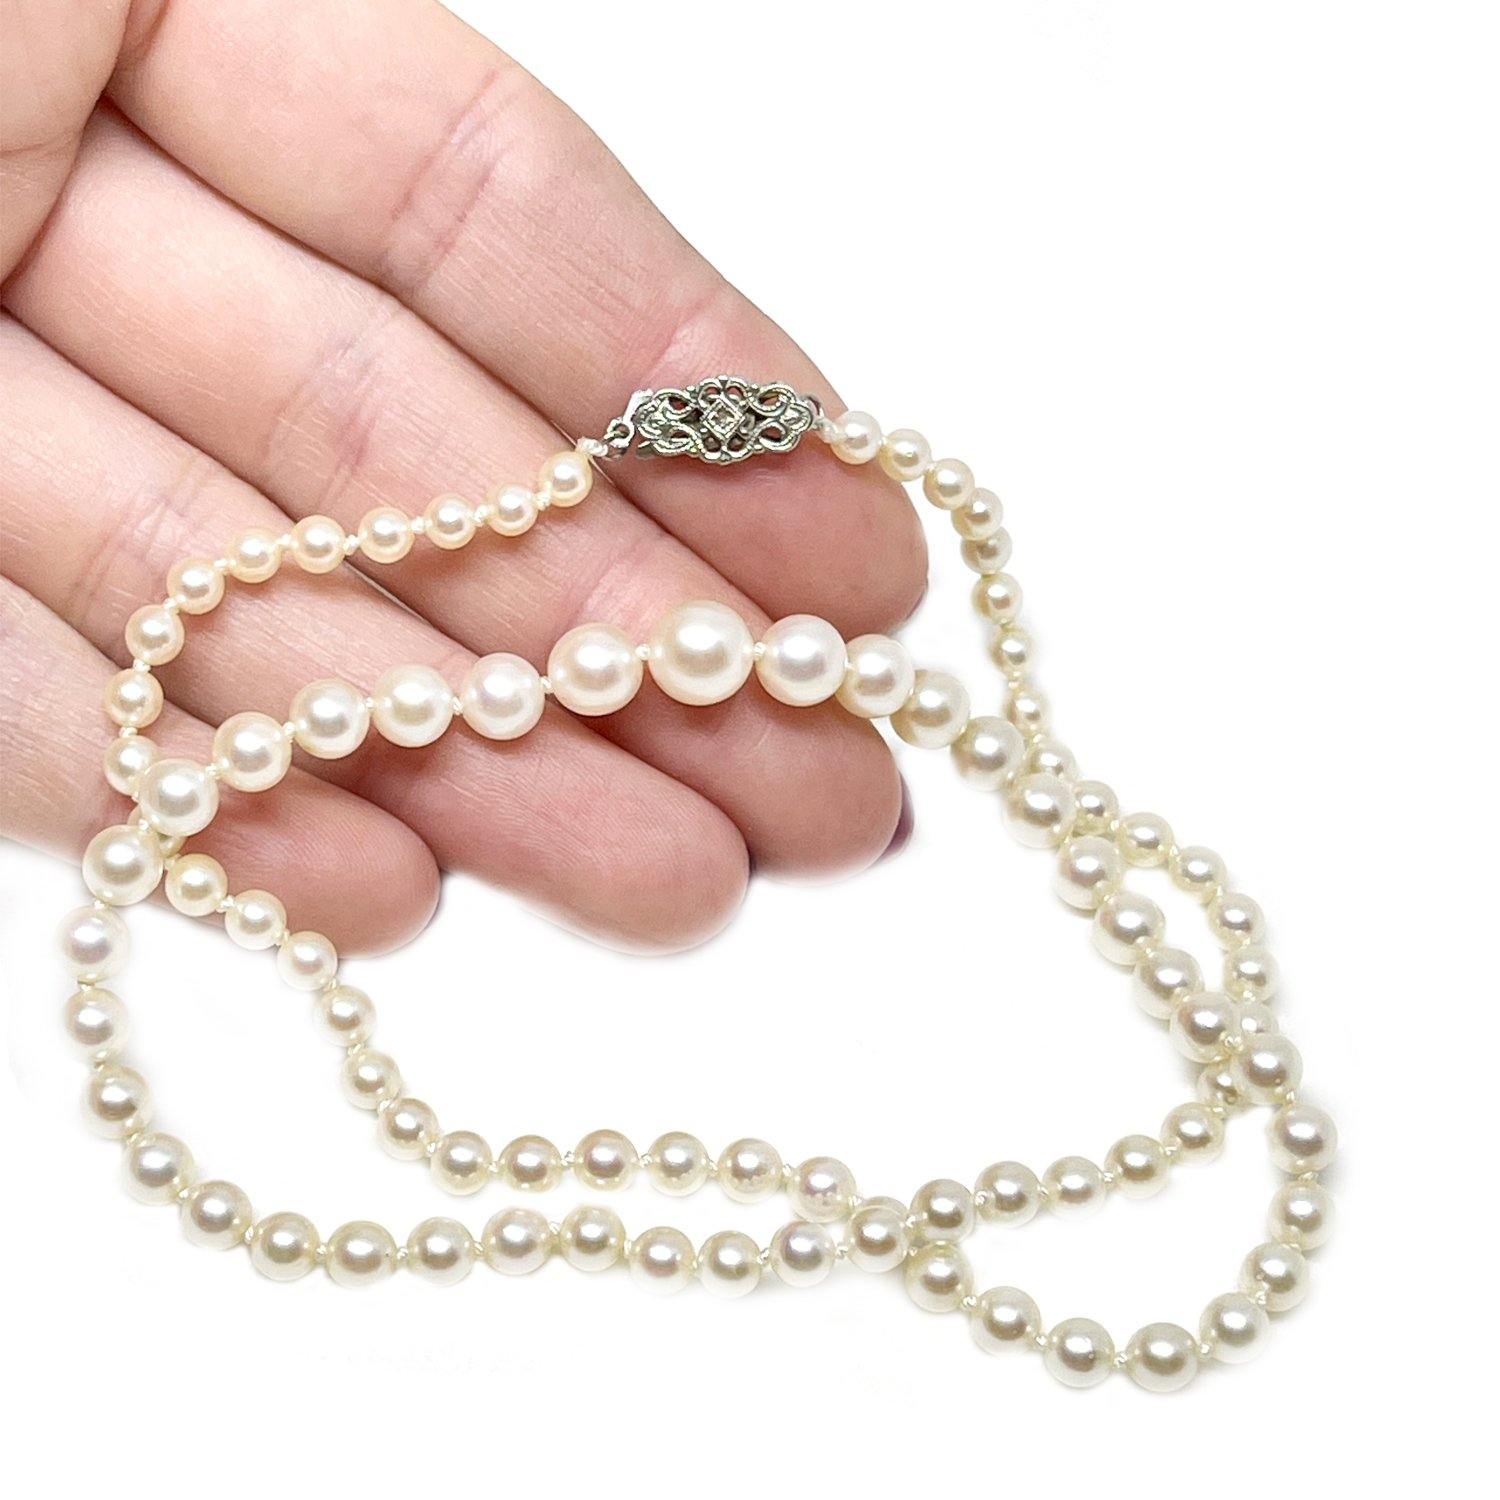 Art Nouveau Japanese Saltwater Cultured Akoya Pearl Necklace - 14K White Gold Diamond 18.50 Inch